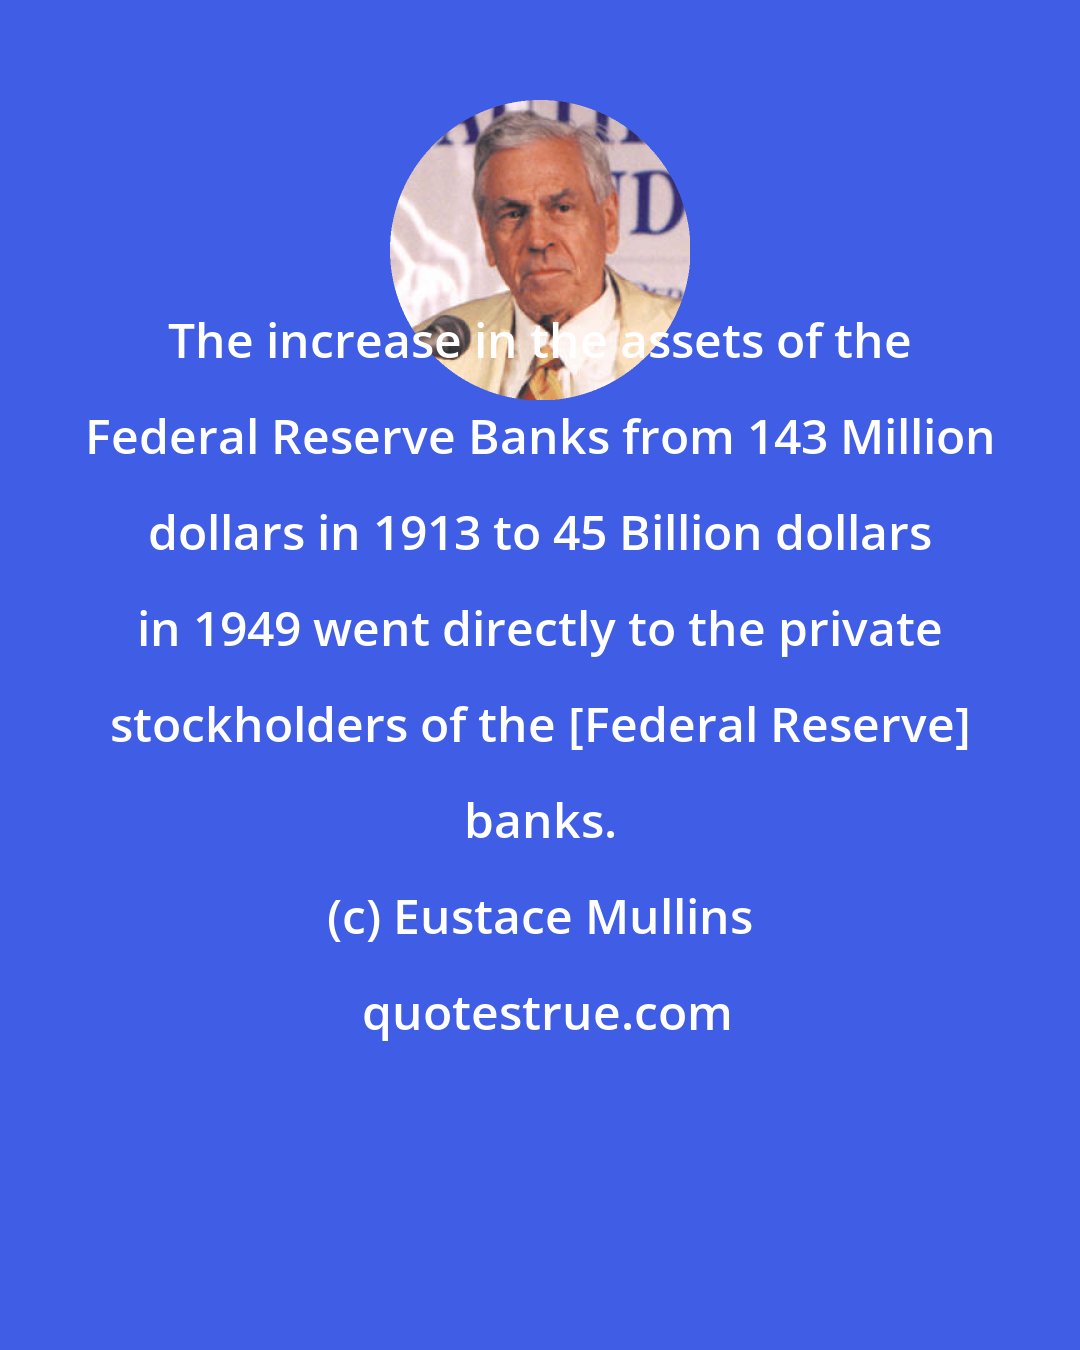 Eustace Mullins: The increase in the assets of the Federal Reserve Banks from 143 Million dollars in 1913 to 45 Billion dollars in 1949 went directly to the private stockholders of the [Federal Reserve] banks.